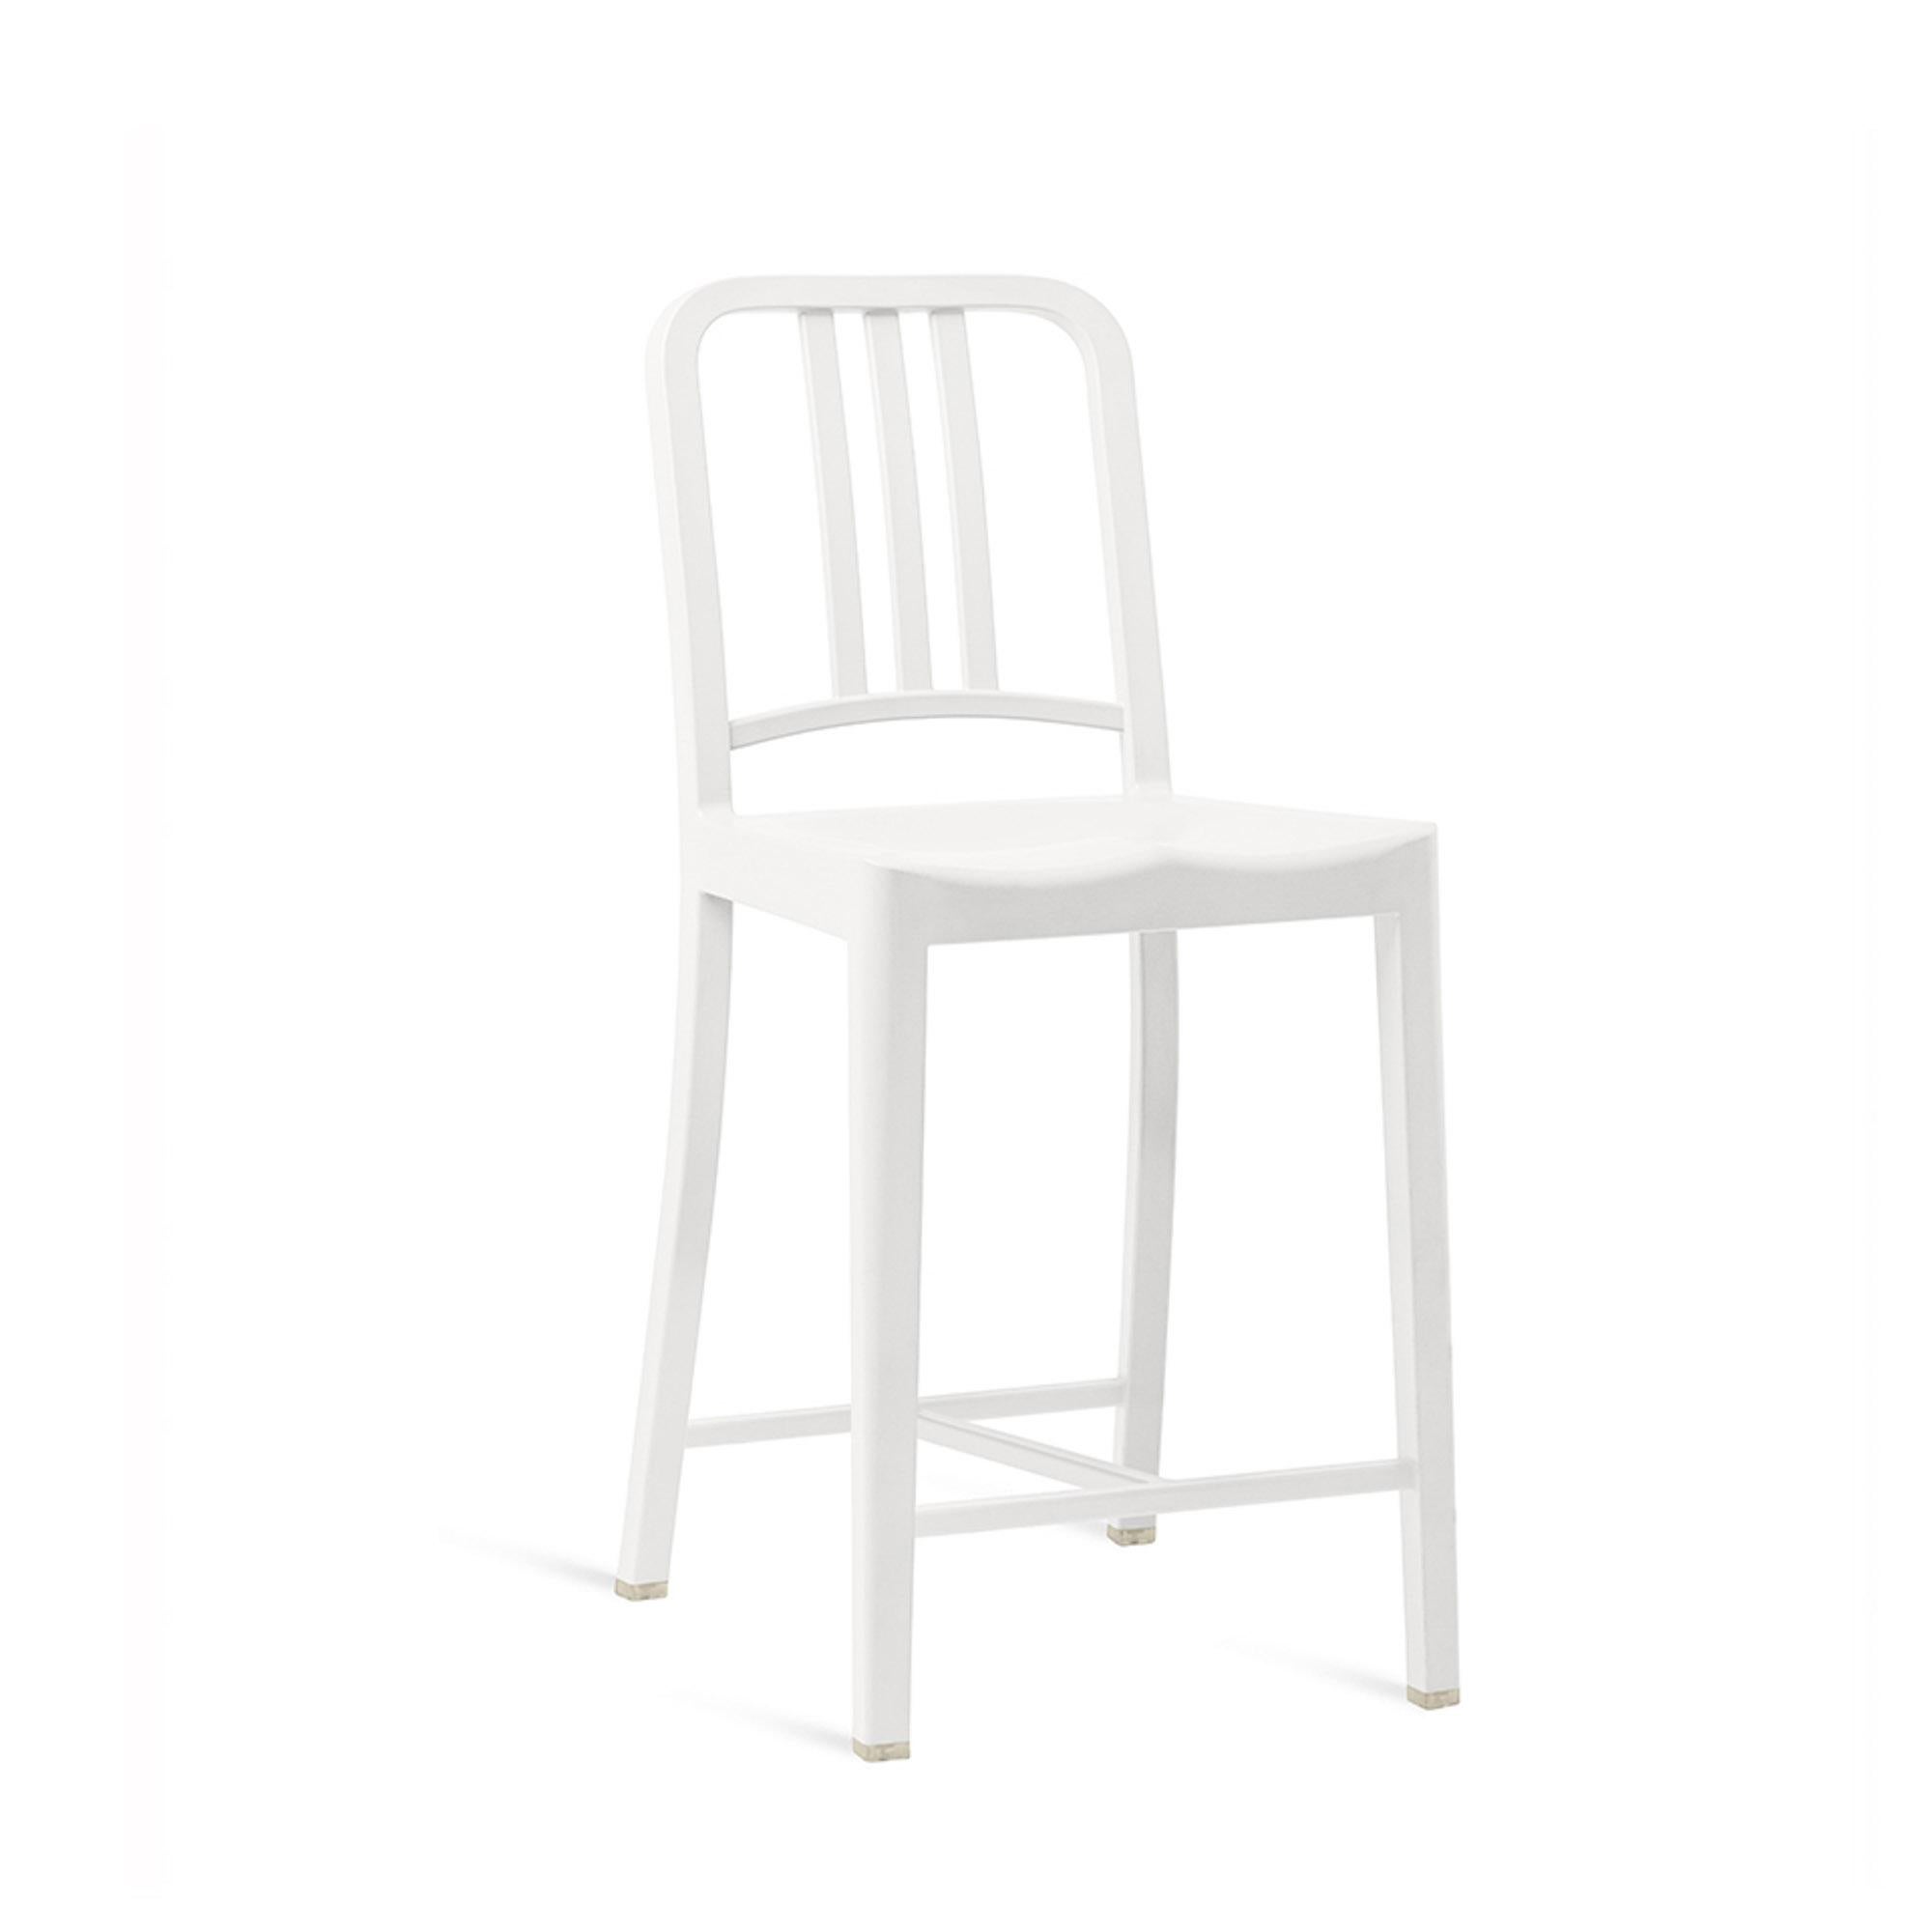 The 111 Navy collection is a story of innovation, turning waste plastic into something that lasts. Each stool is made of 150 recycled PET bottles. Like the original 111 Navy chair, these one-piece stools are an engineering success - made to Stand up